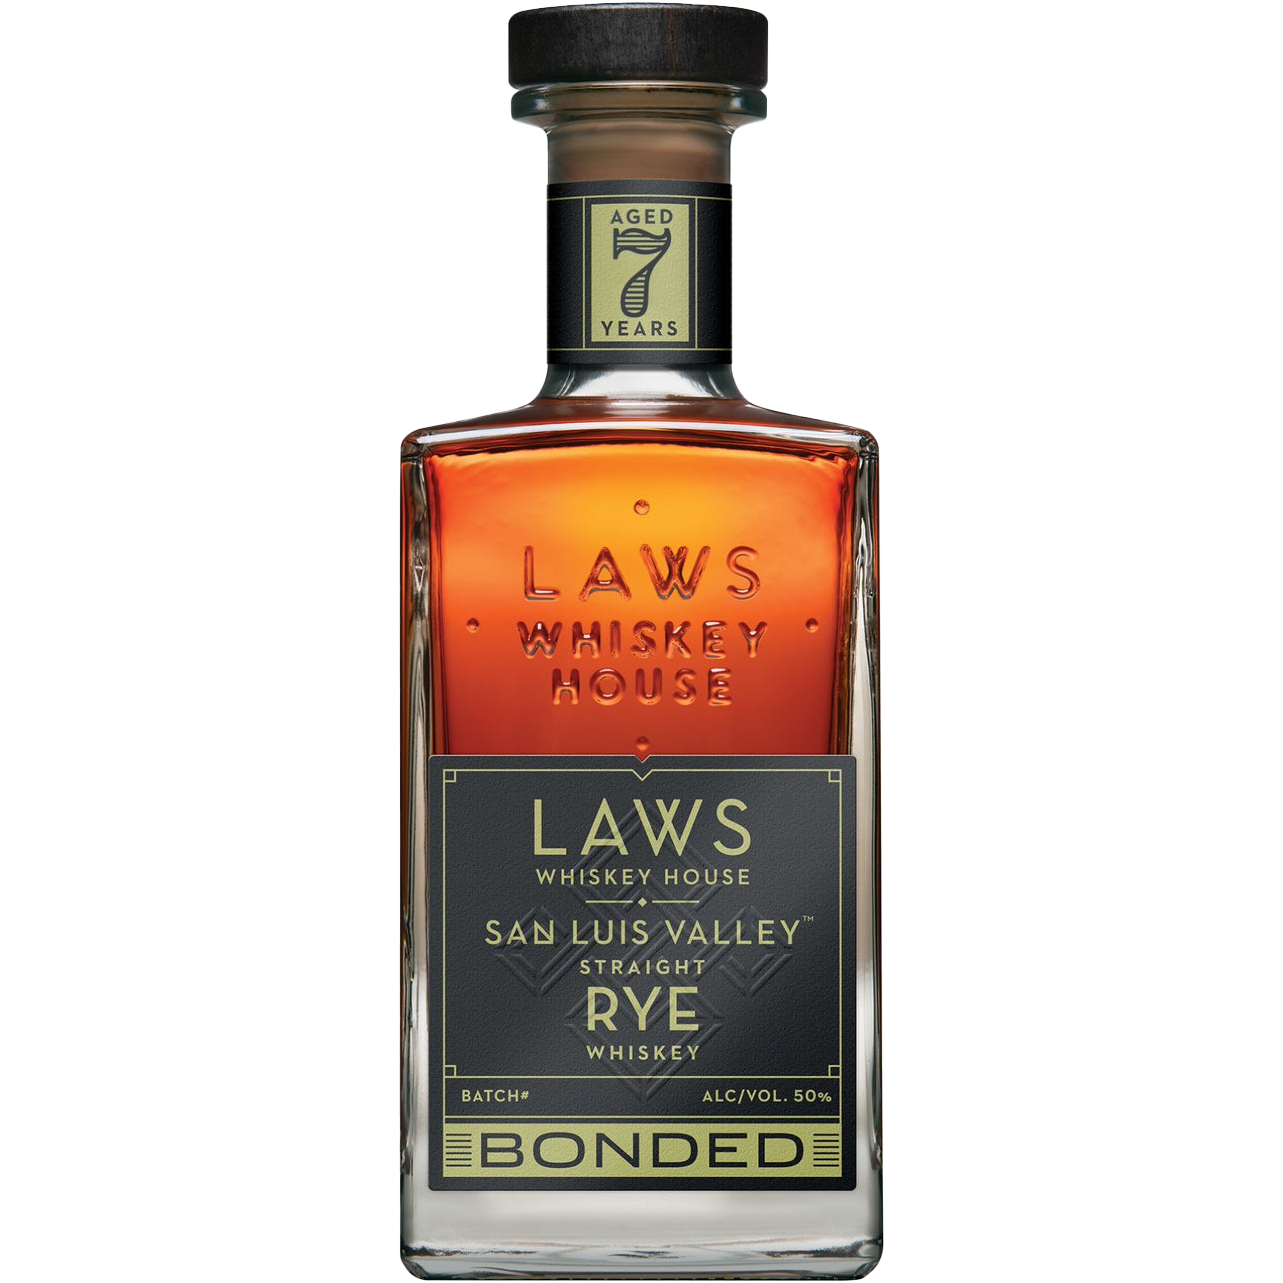 Laws 'San Luis Valley' Straight Rye Whiskey, Bottled in Bond